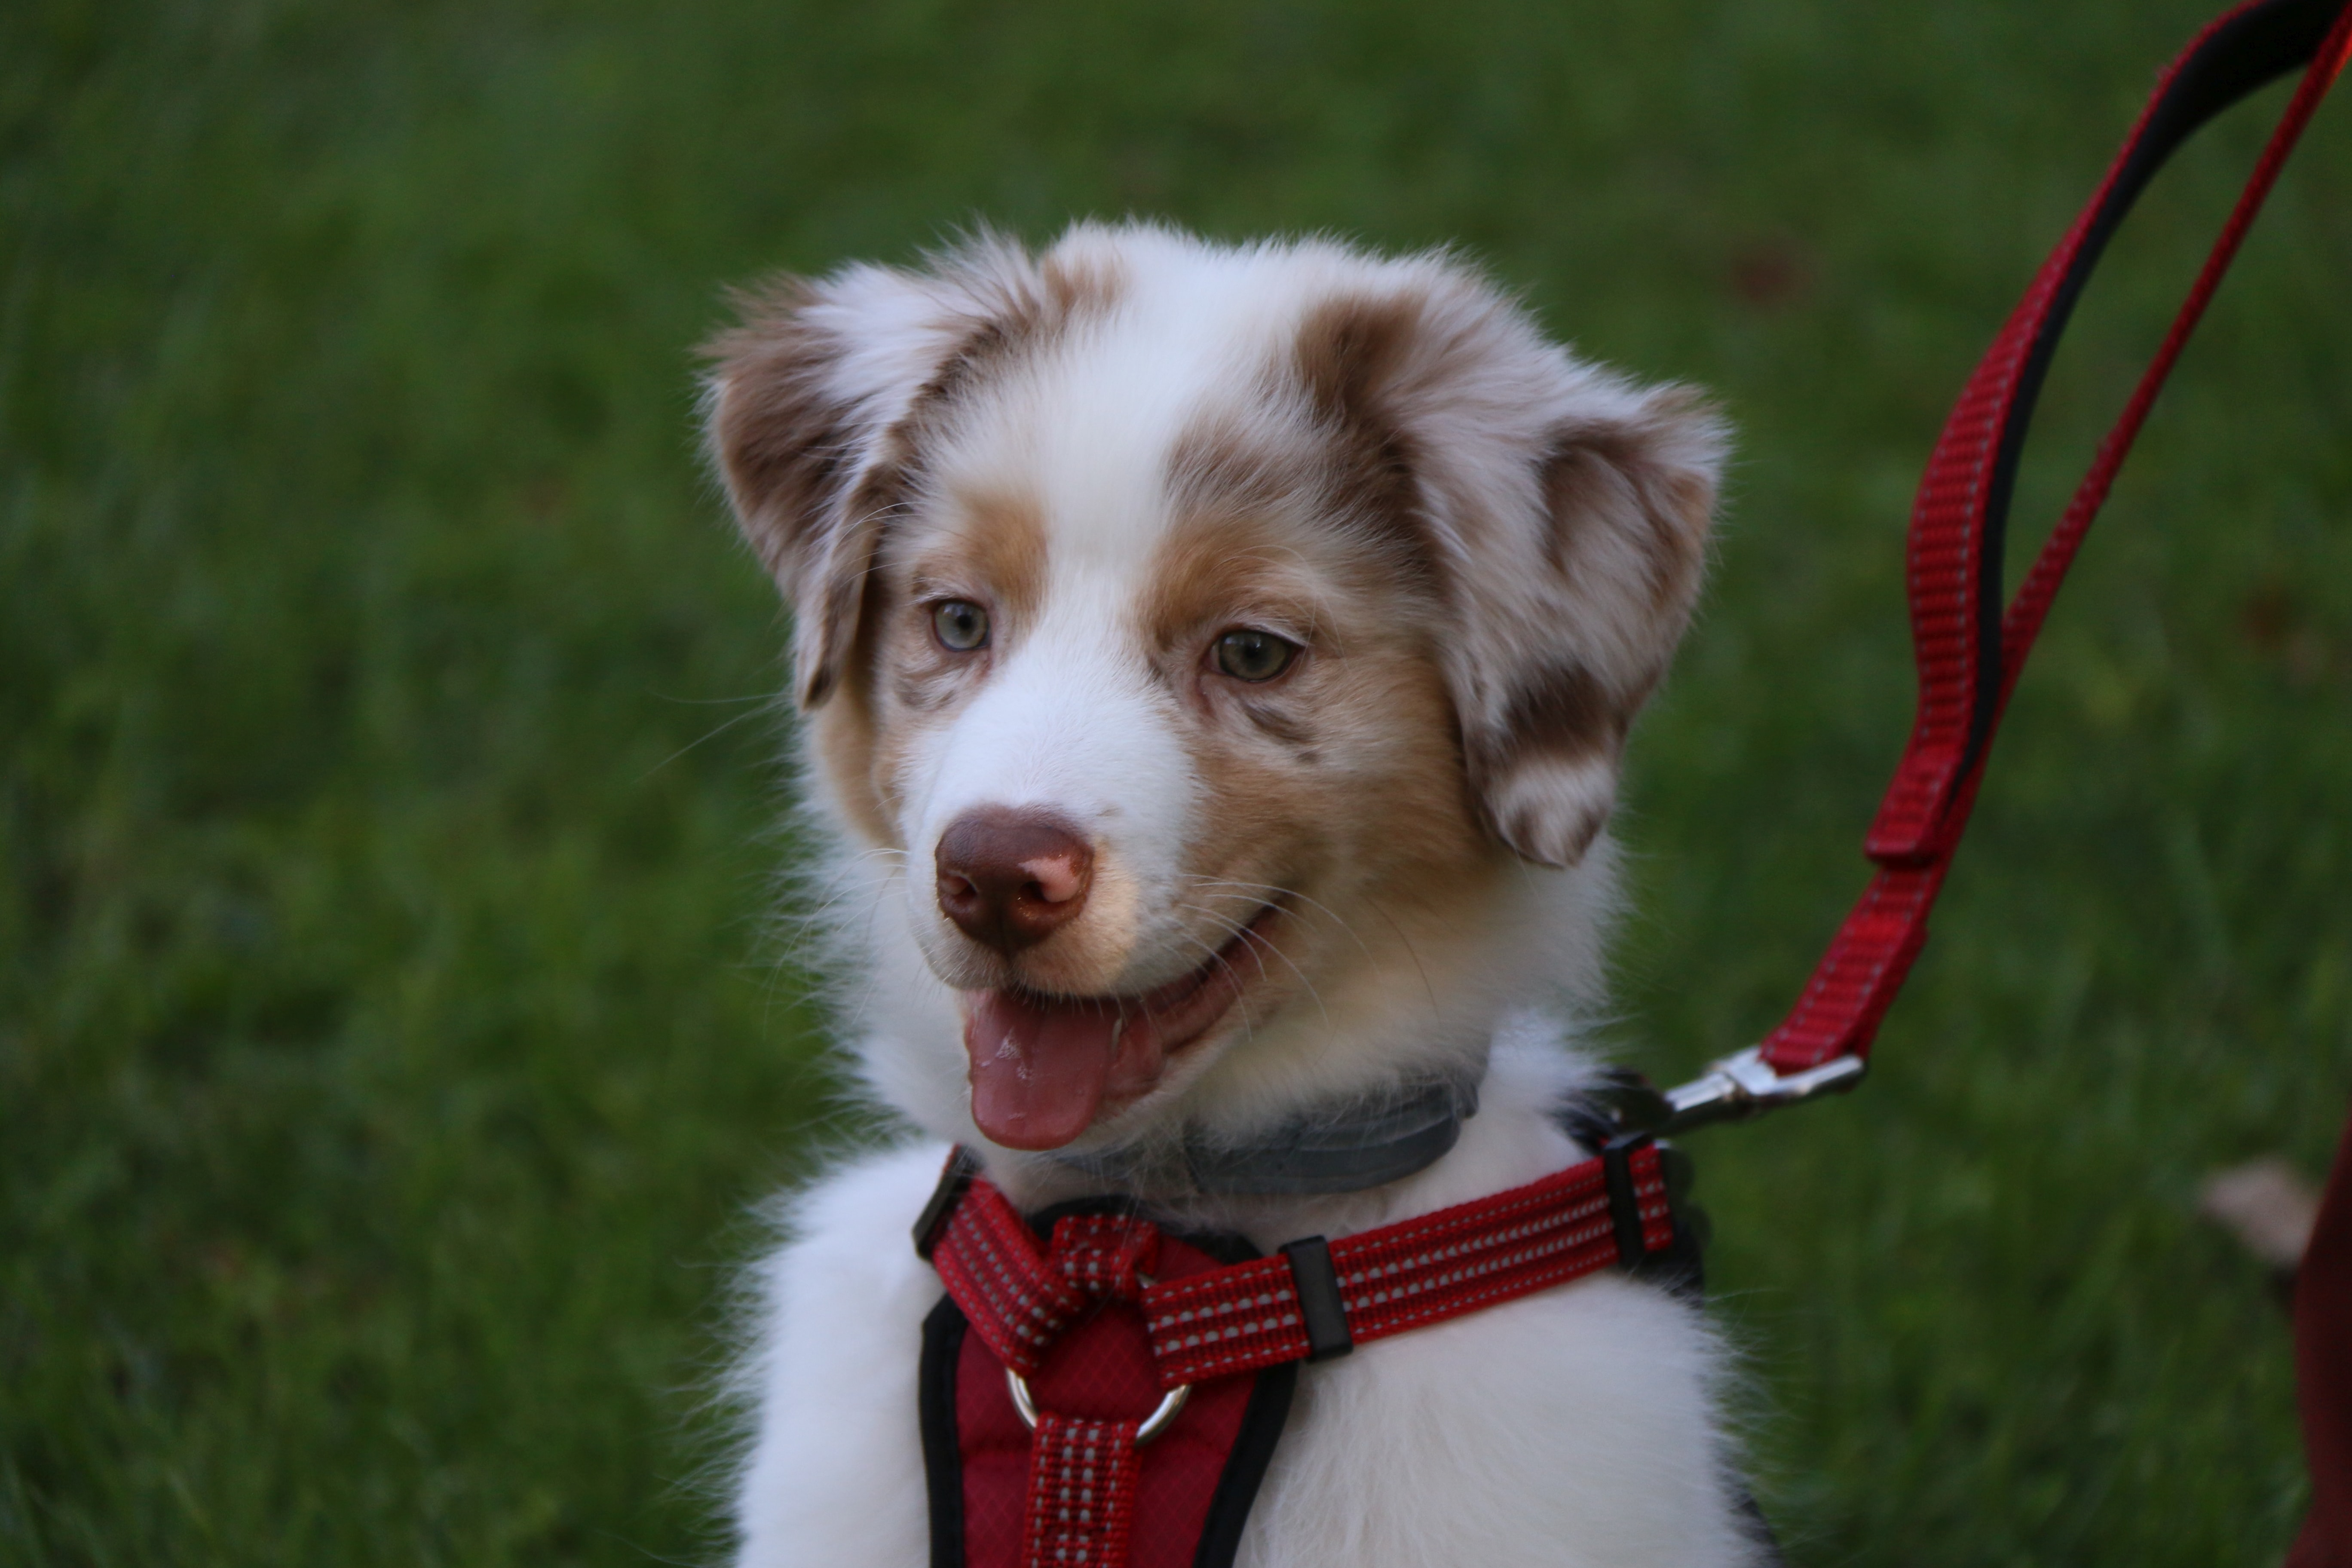 dog wearing a red collar and leash